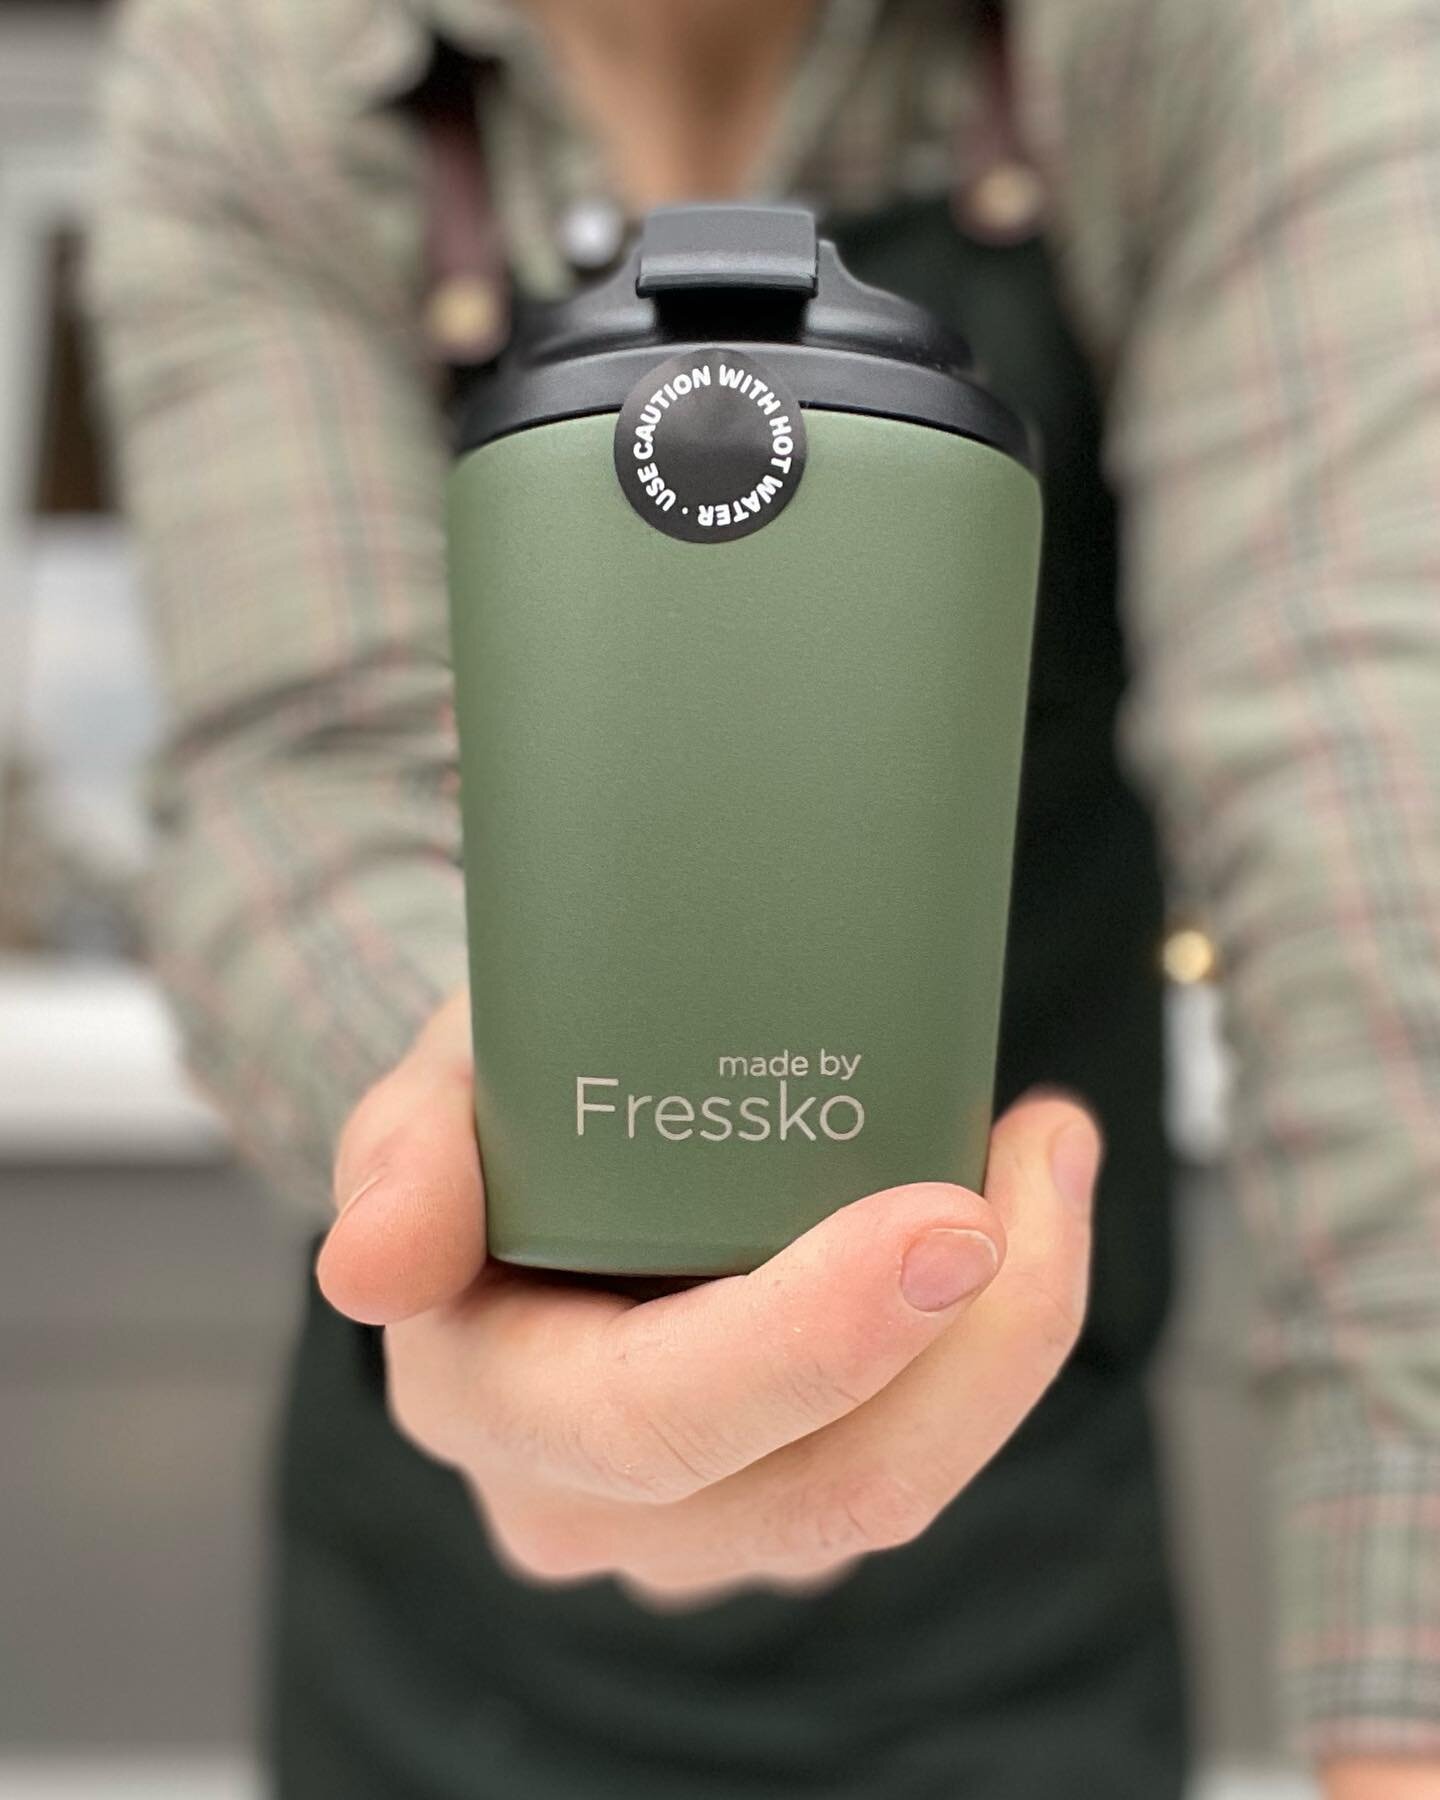 When the best keep cup in the world is back in stock 🙌🏻 @madebyfressko_official